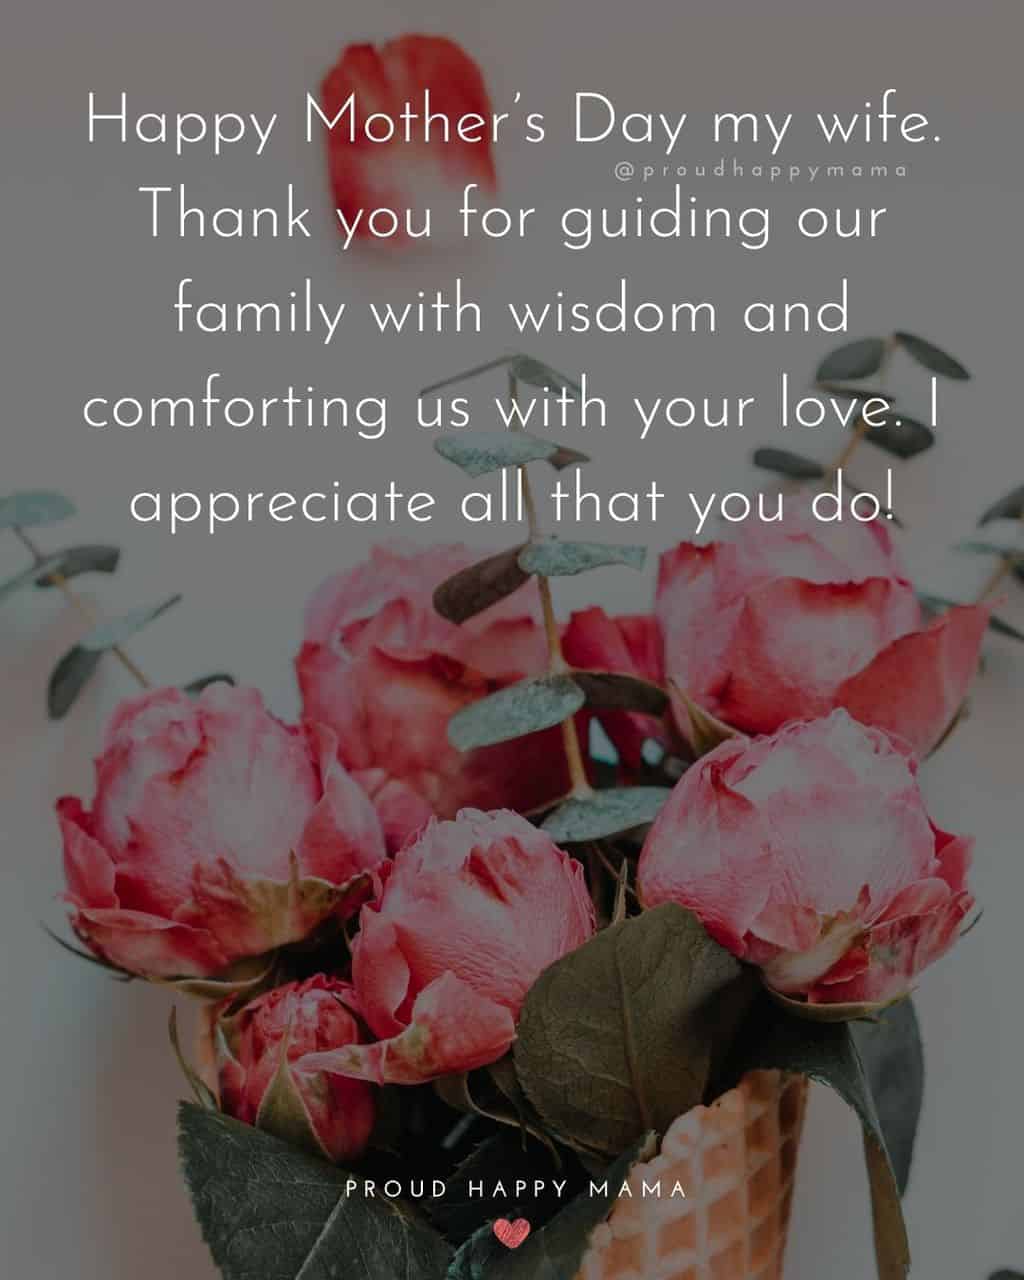 Happy Mothers Day Quotes For Wife - Happy Mother’s Day my wife. Thank you for guiding our family with wisdom and